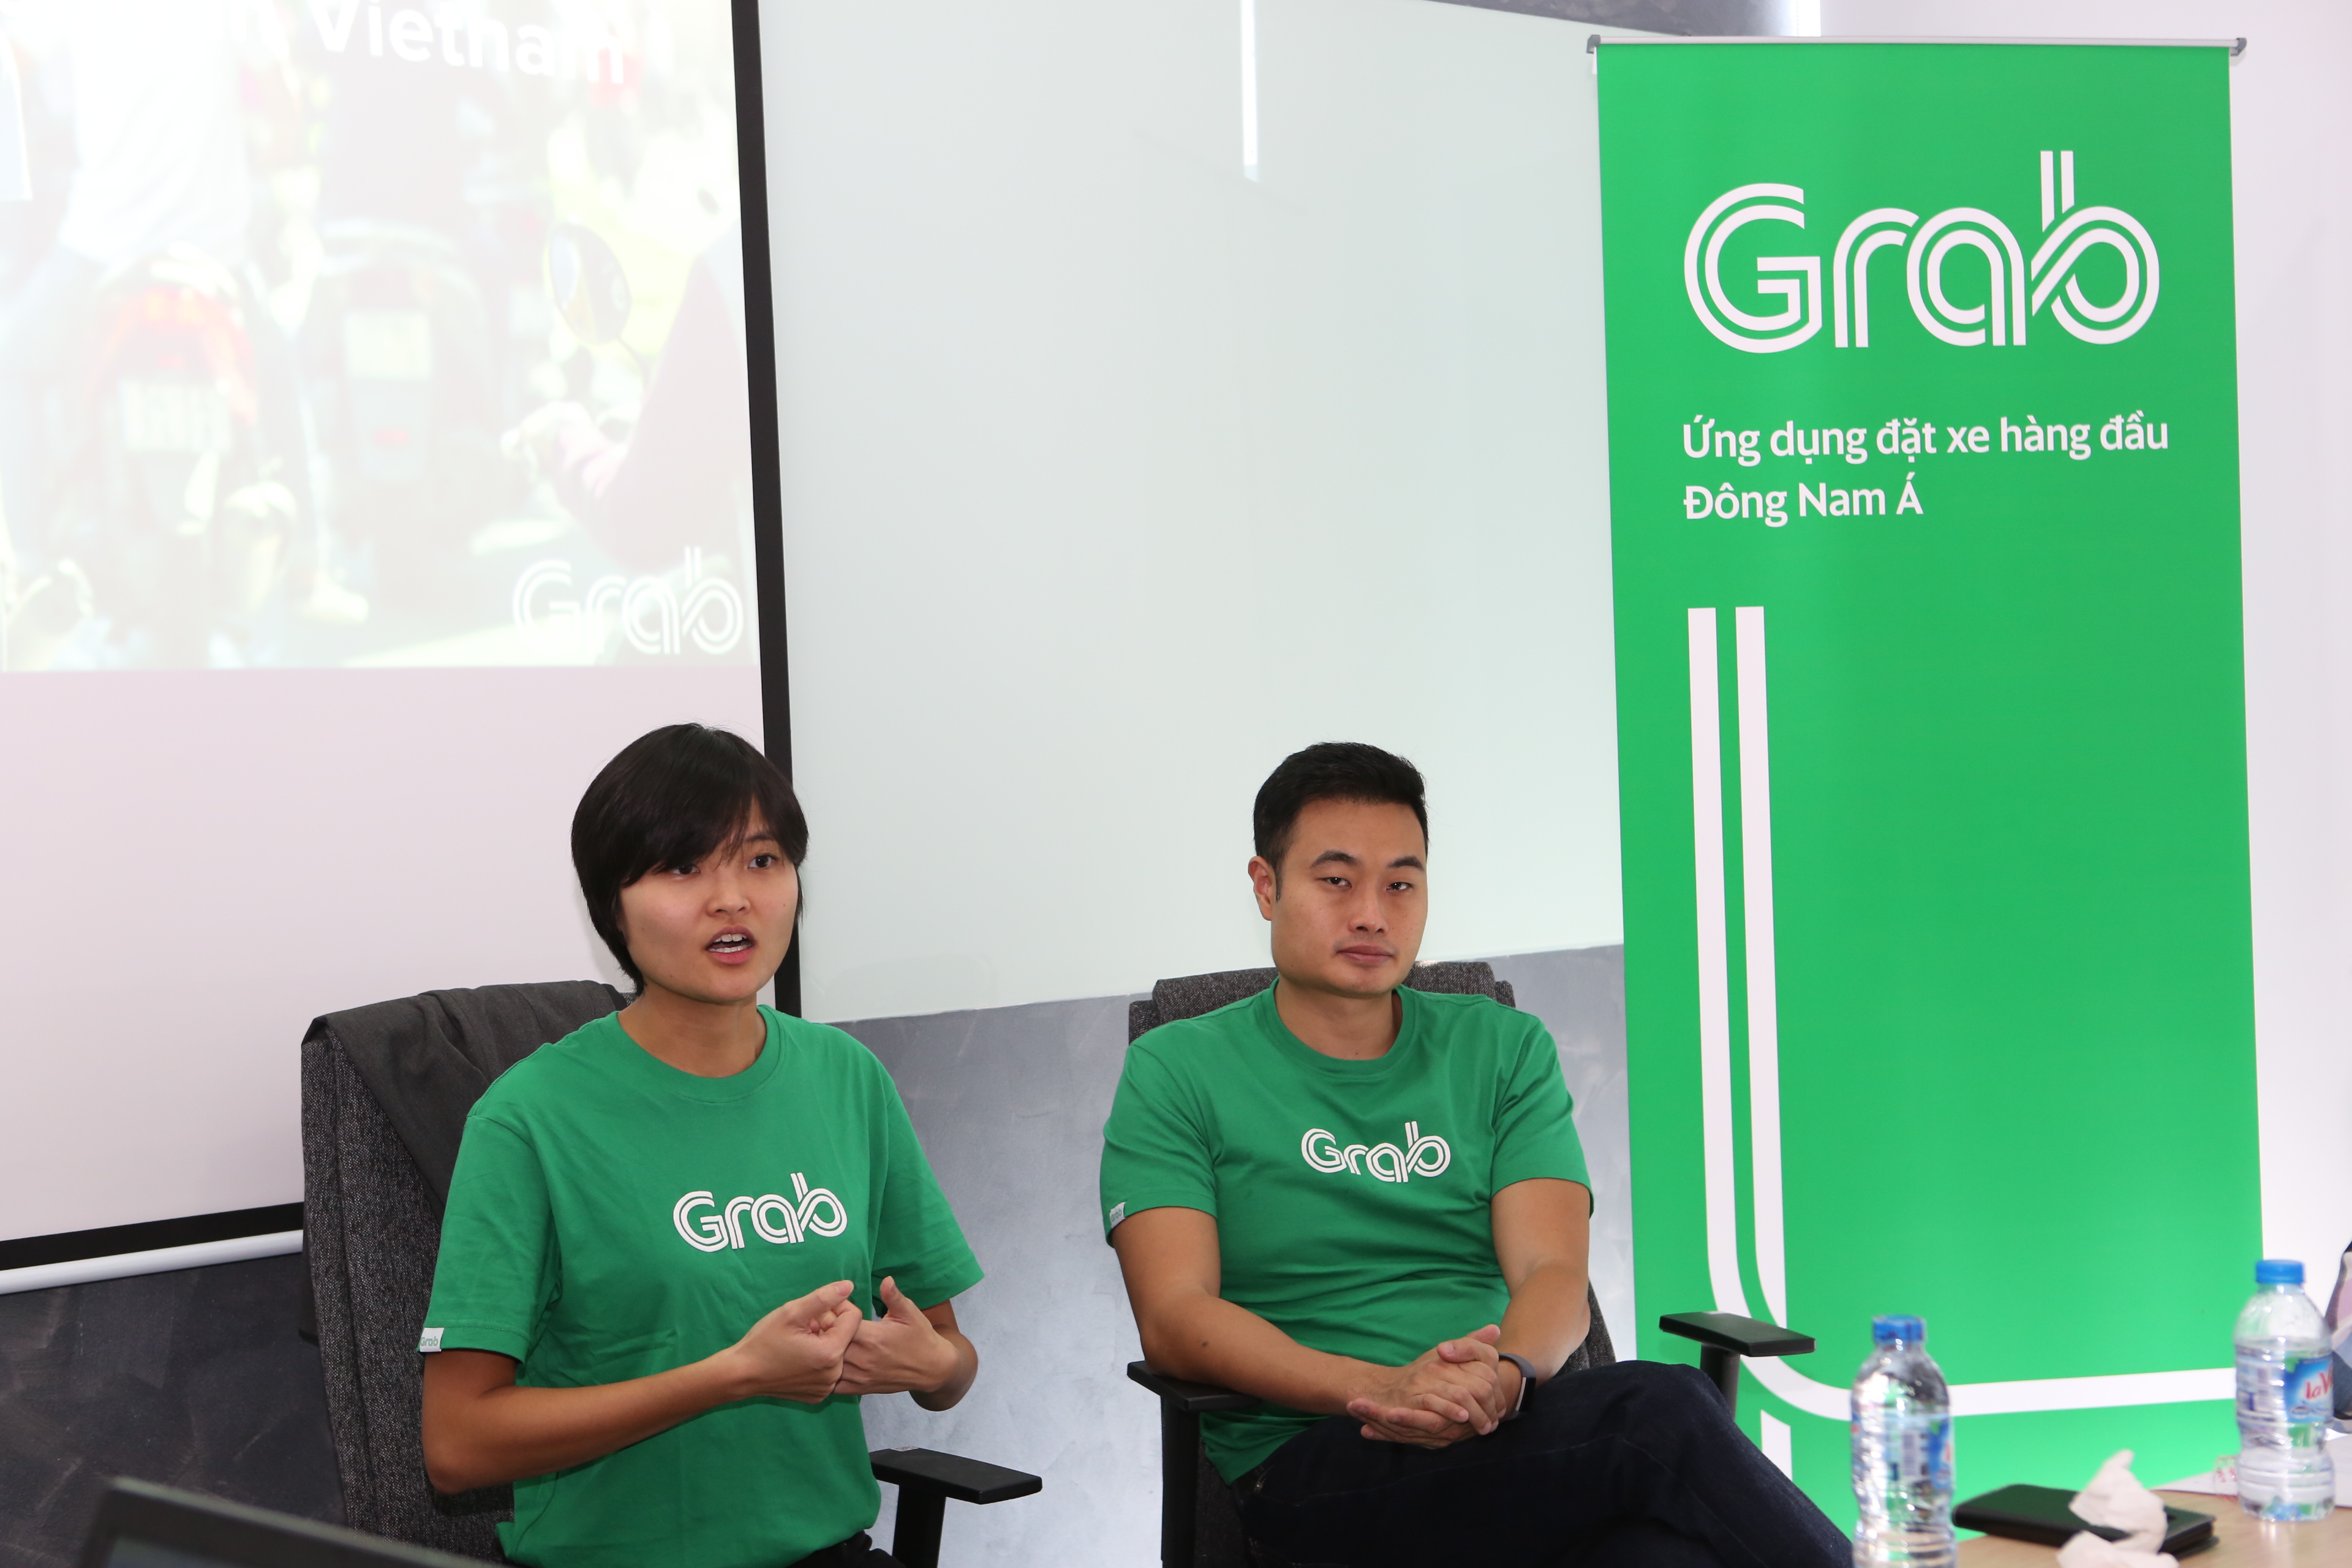 HCMC’s District 10 tax department confirms VND140 billion tax payment of Grab